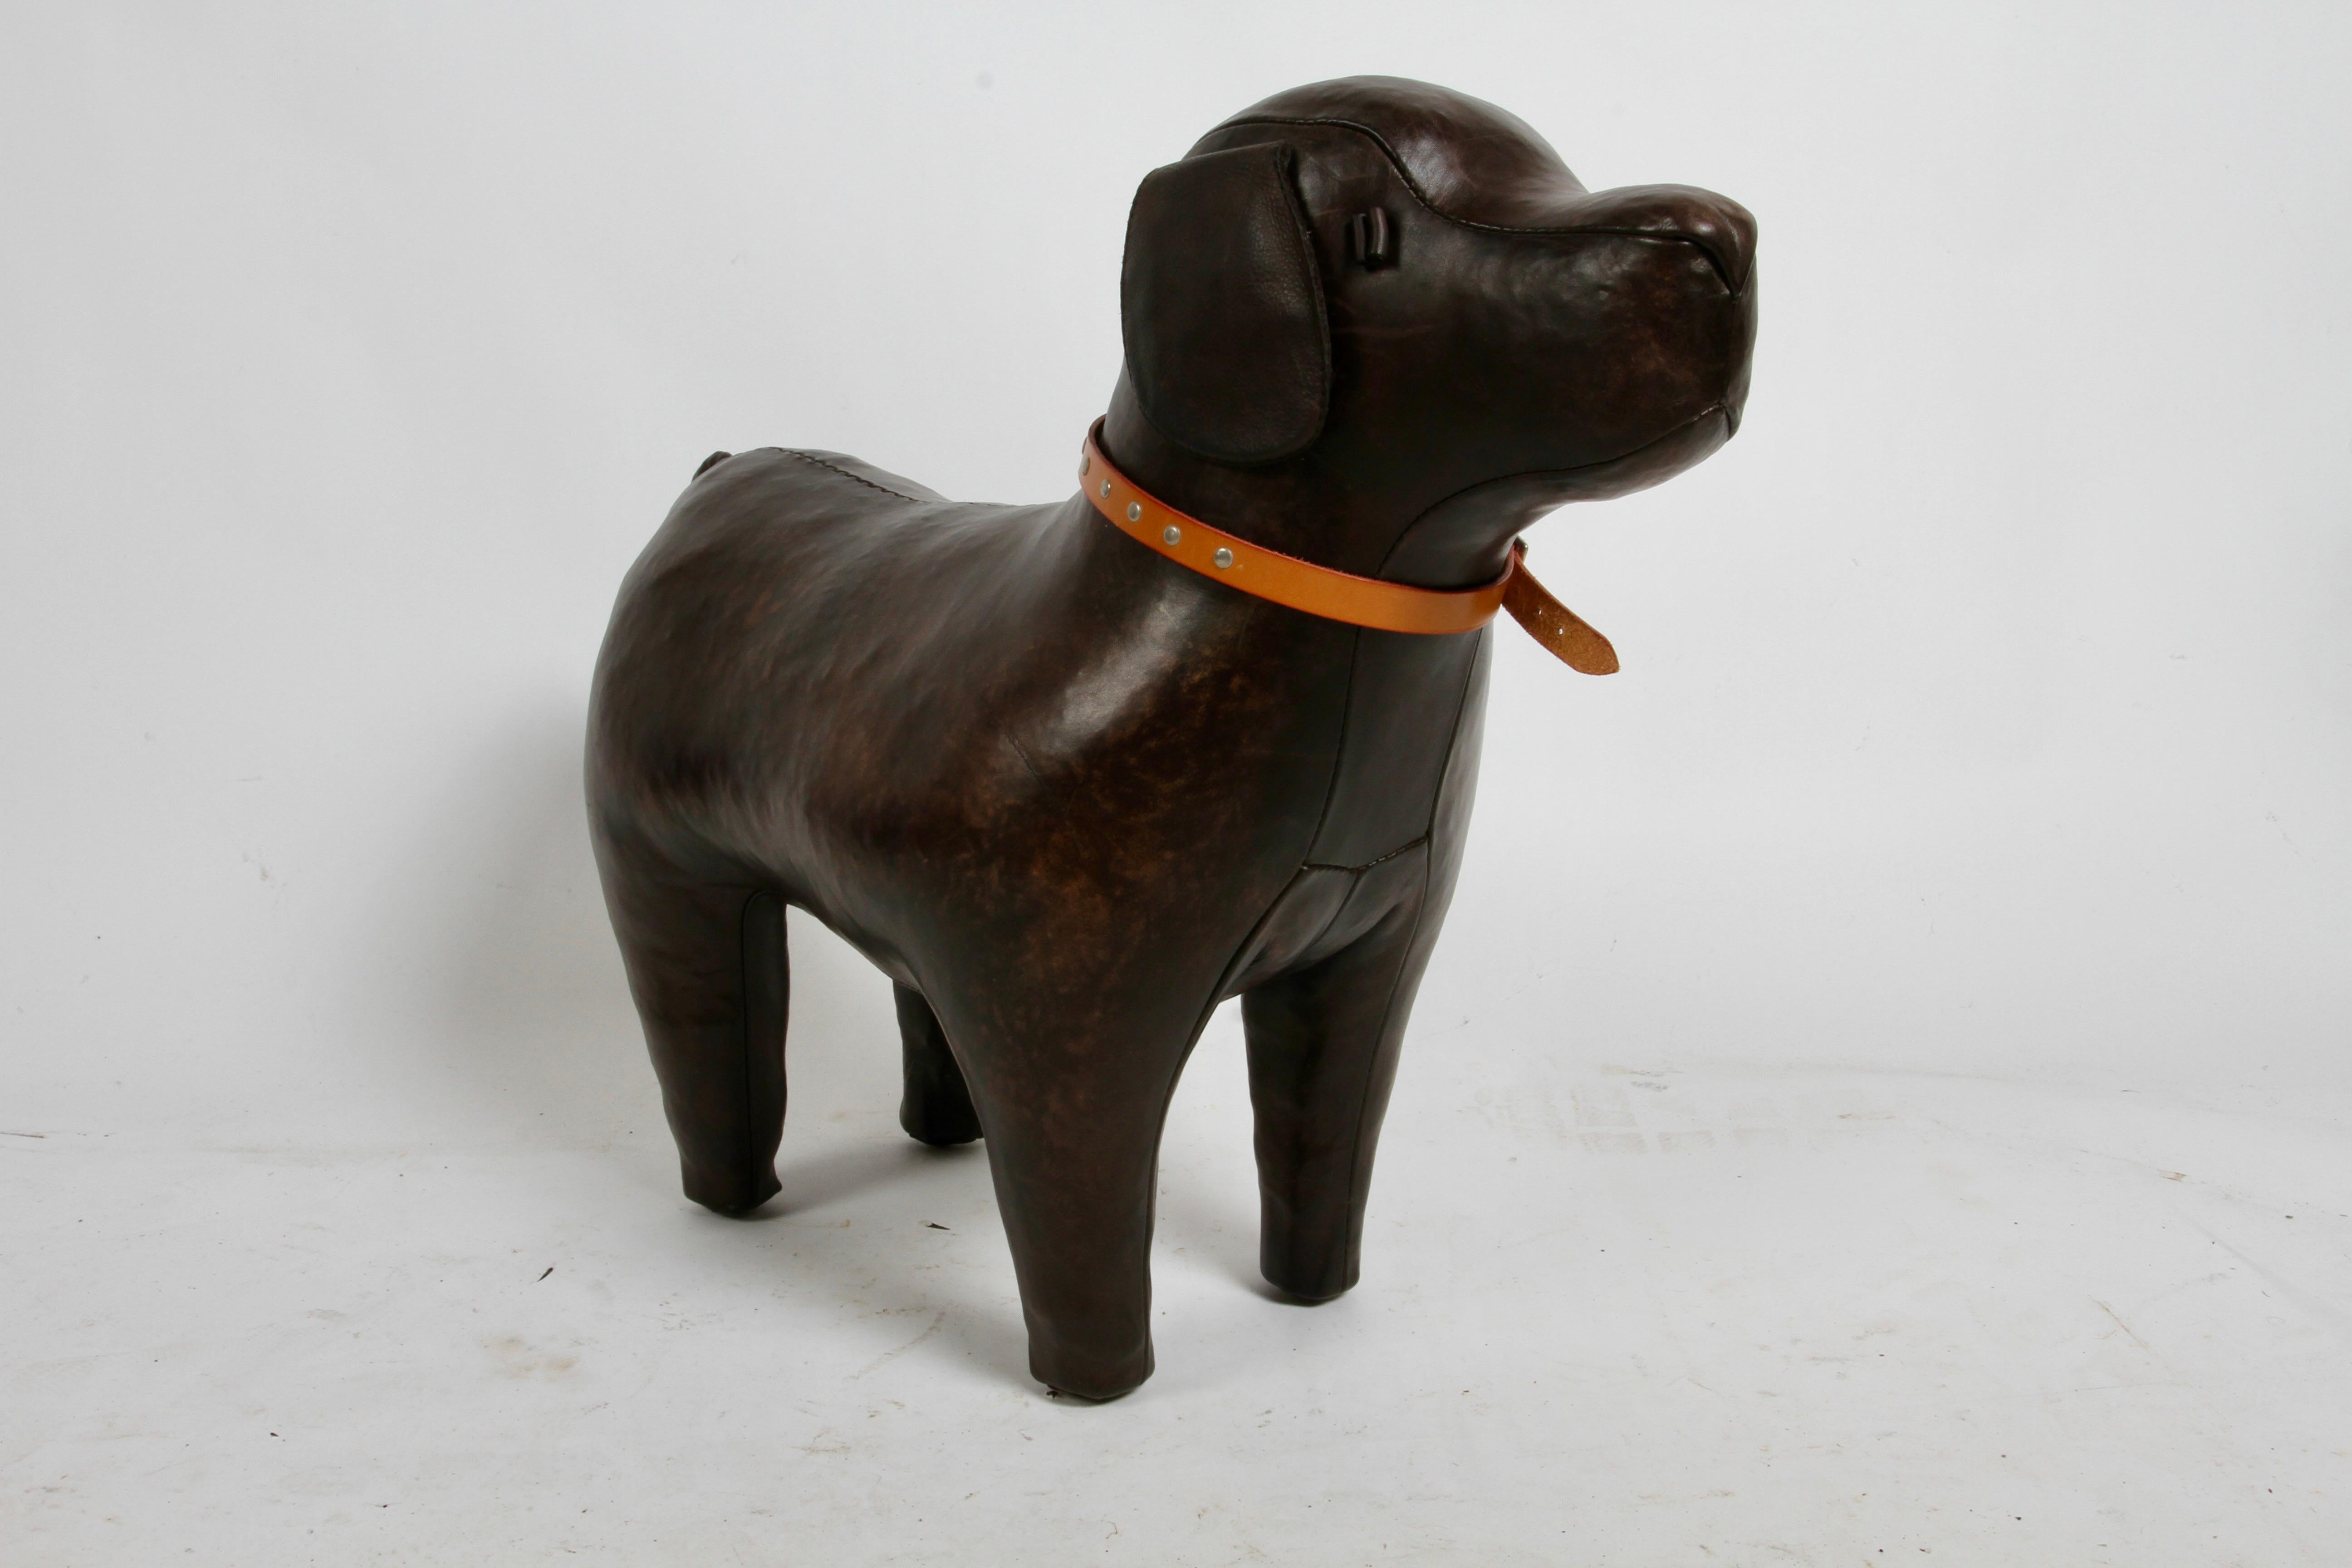 Attention dog lovers , listed is a Labrador footstool or sculpture by Omersa of England in beautiful rick brown leather. I believe this to be a large size , no longer made, now only in medium which is 4